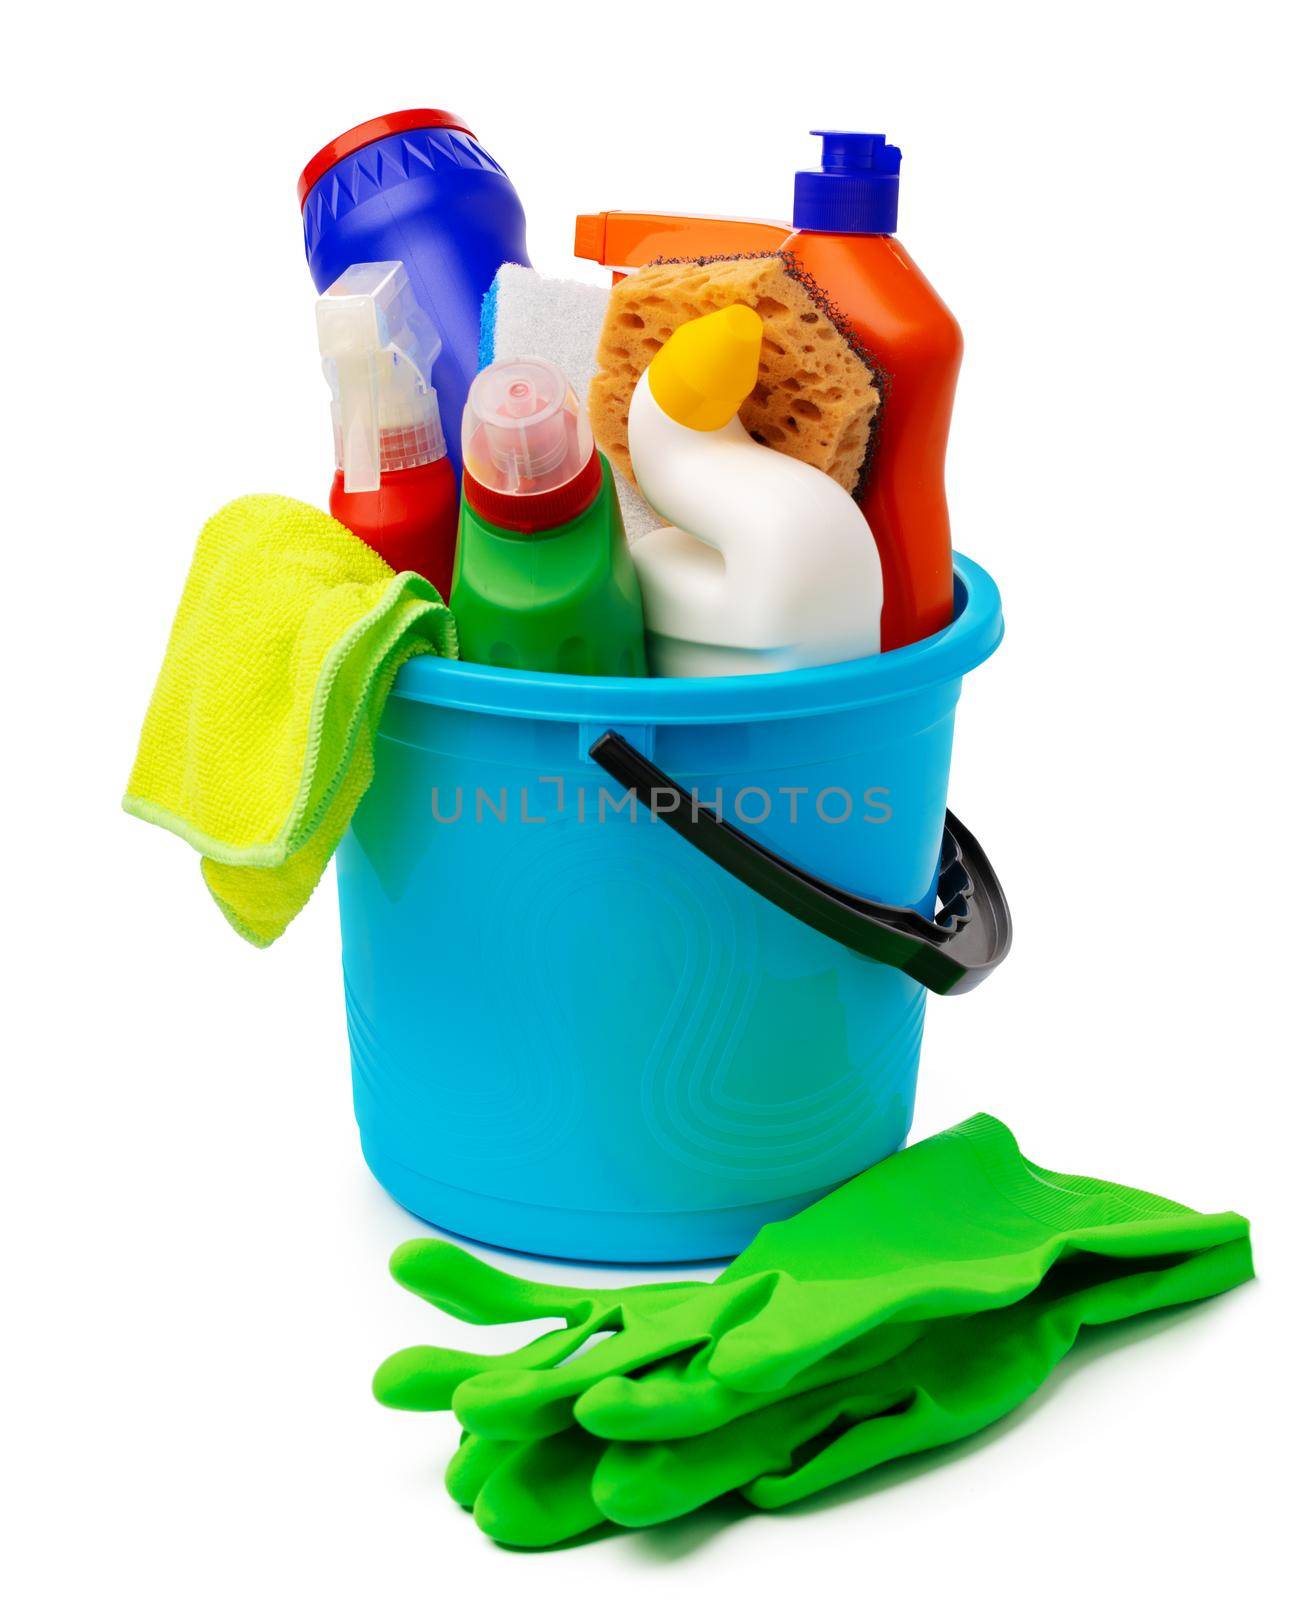 Liquid detergents and cleaning supplies in plastic bucket on white background, close up